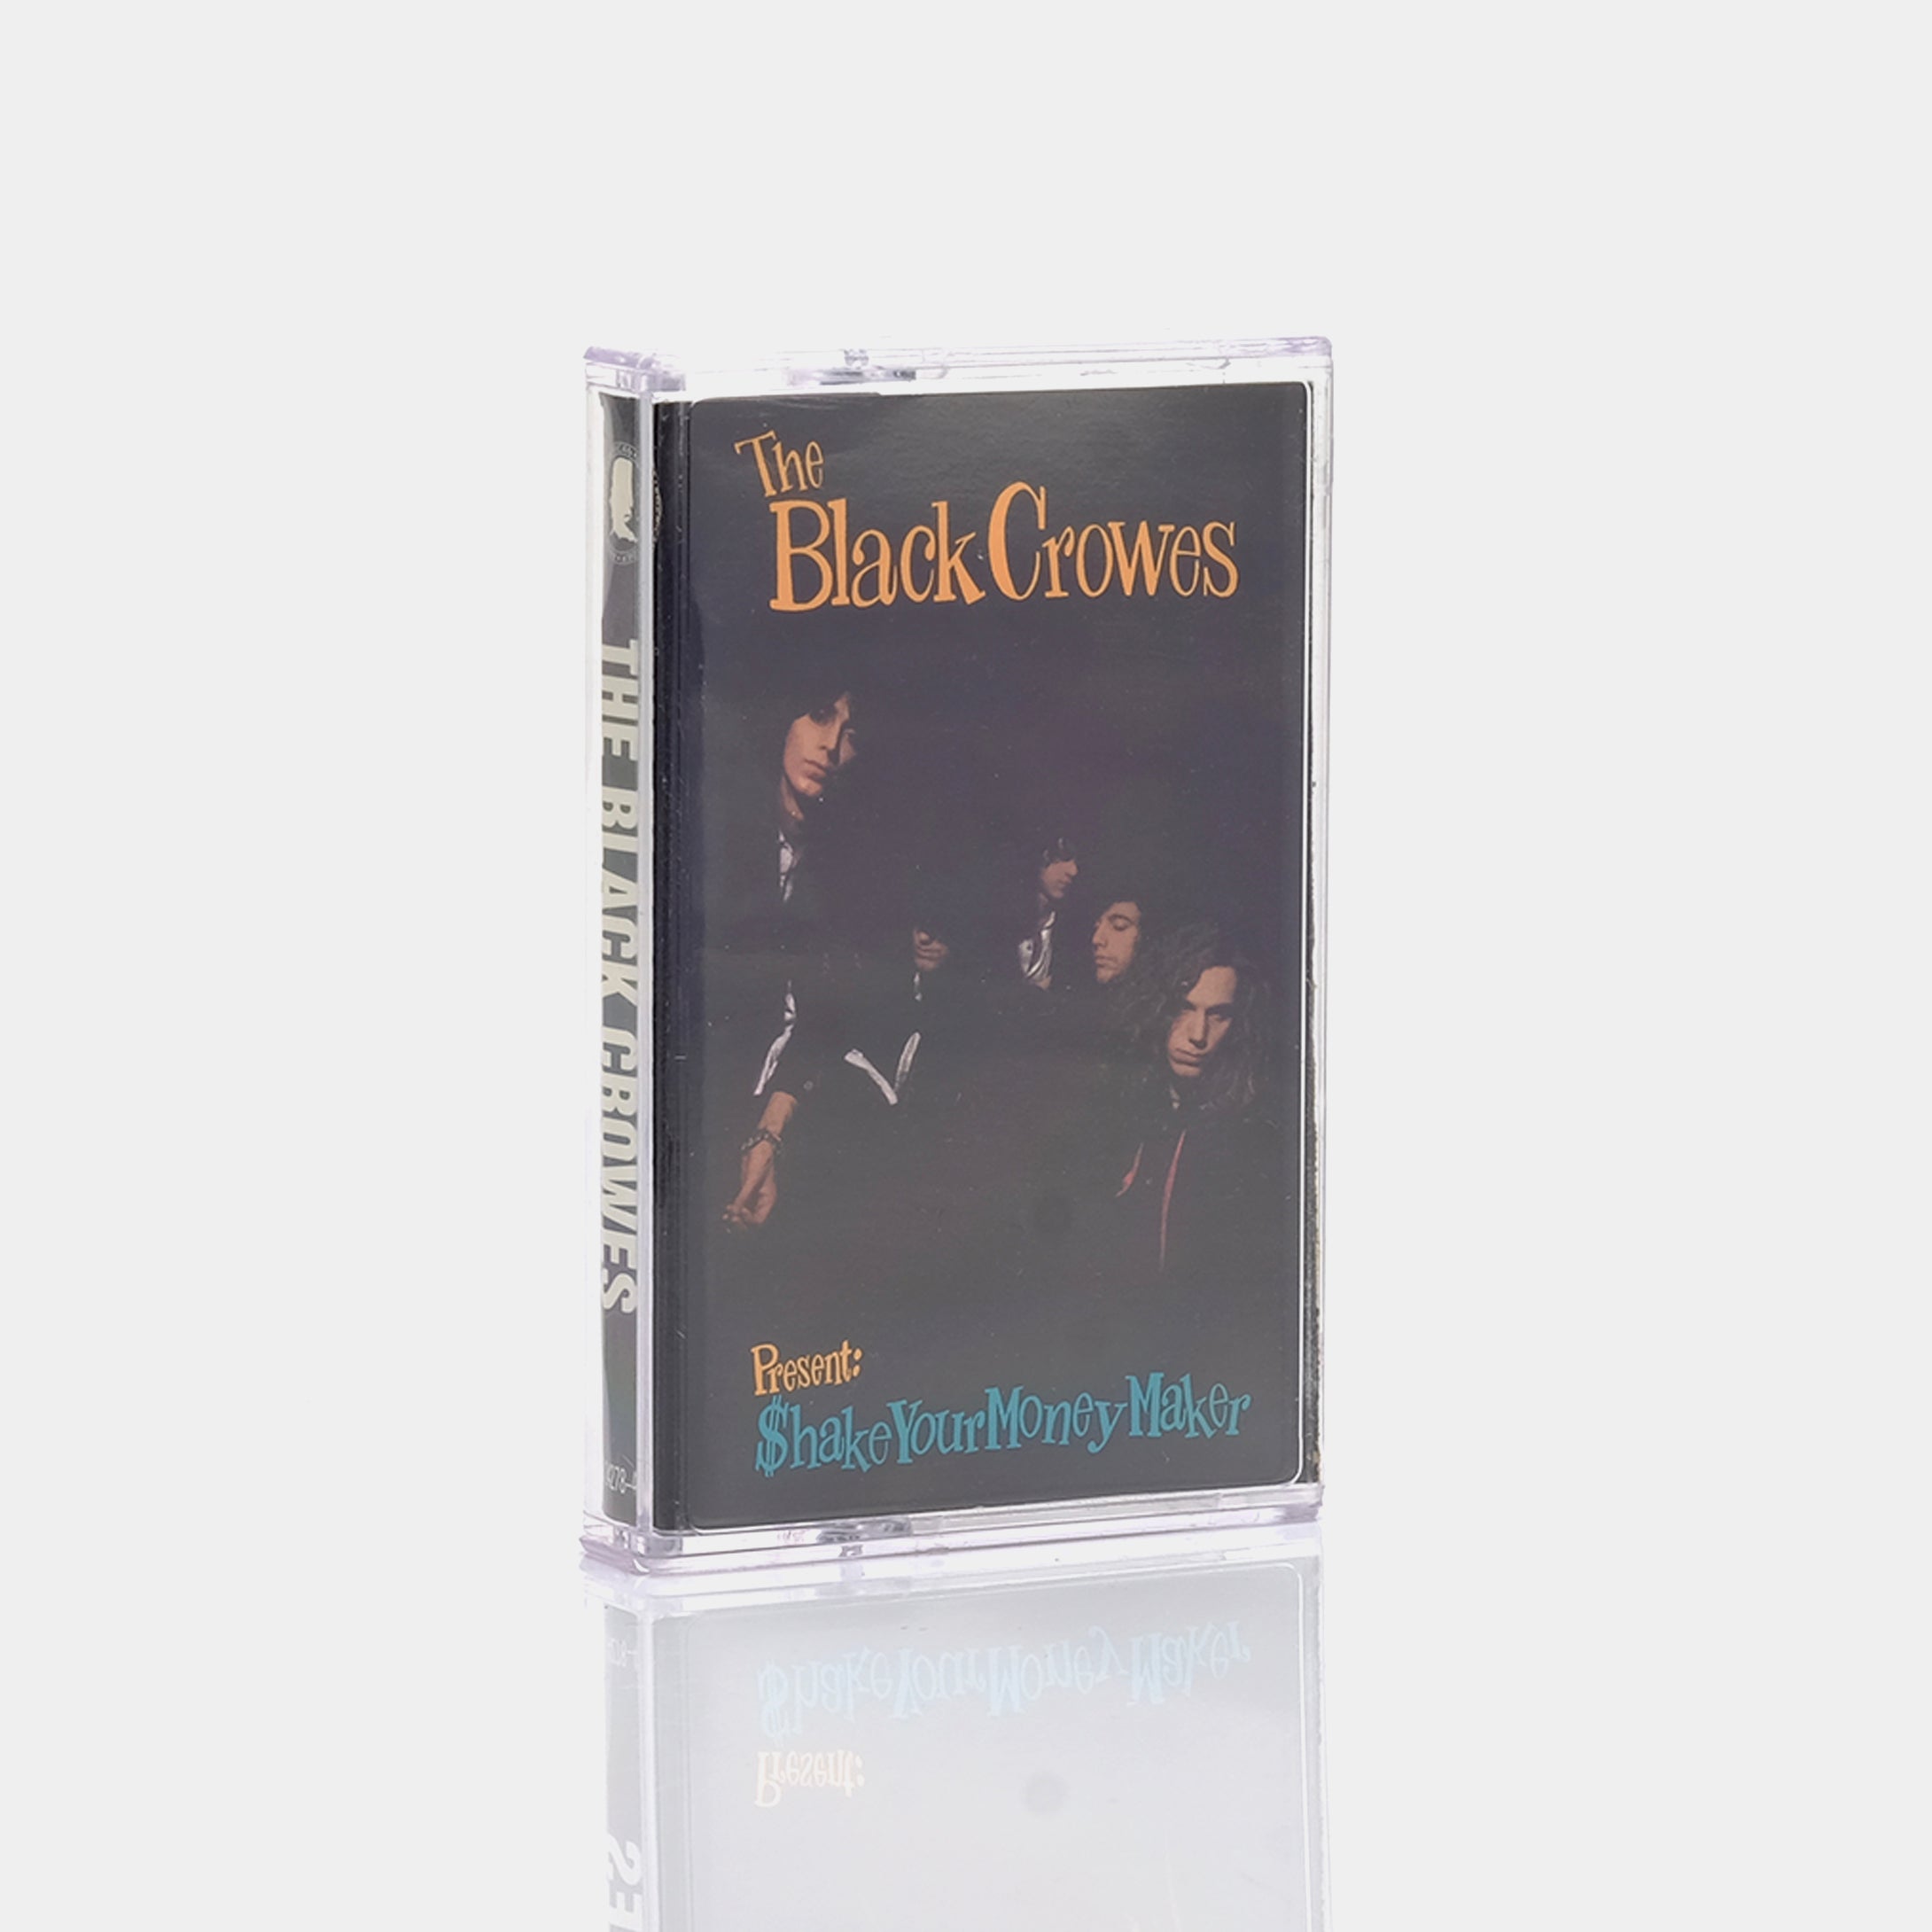 The Black Crowes - Shake Your Money Maker Cassette Tape